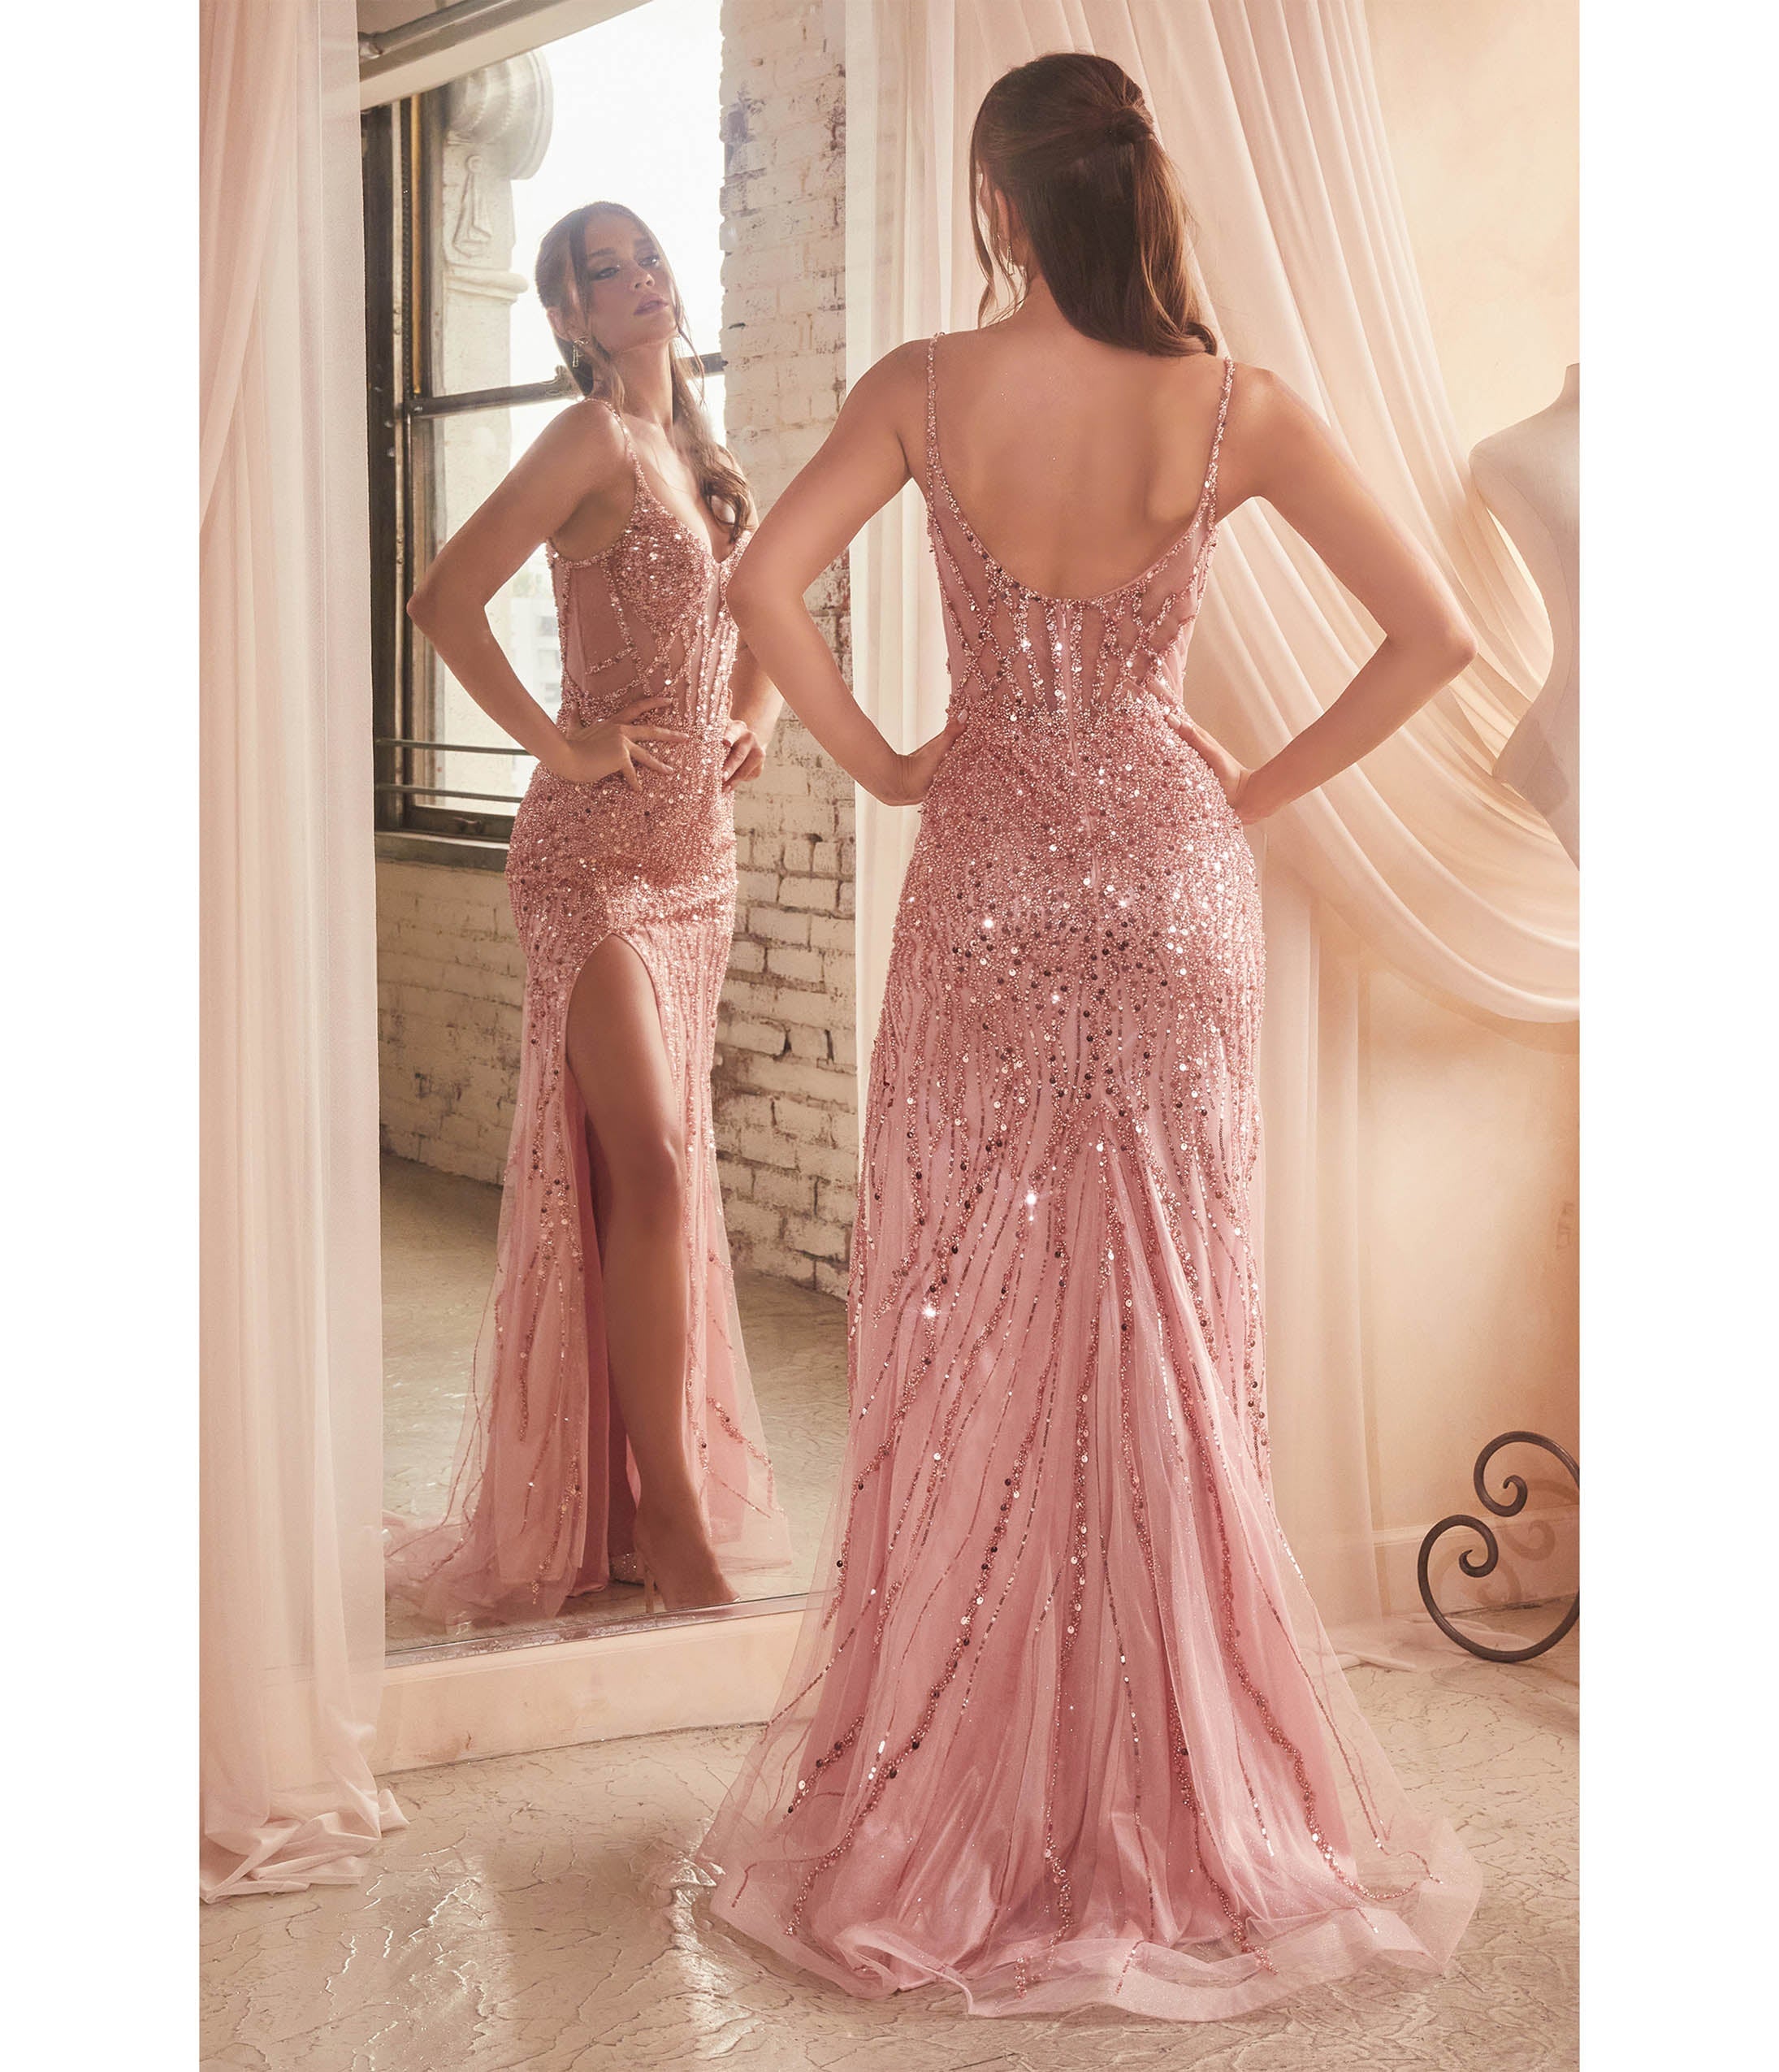 20 Different types of Gowns : The most popular ones - SewGuide